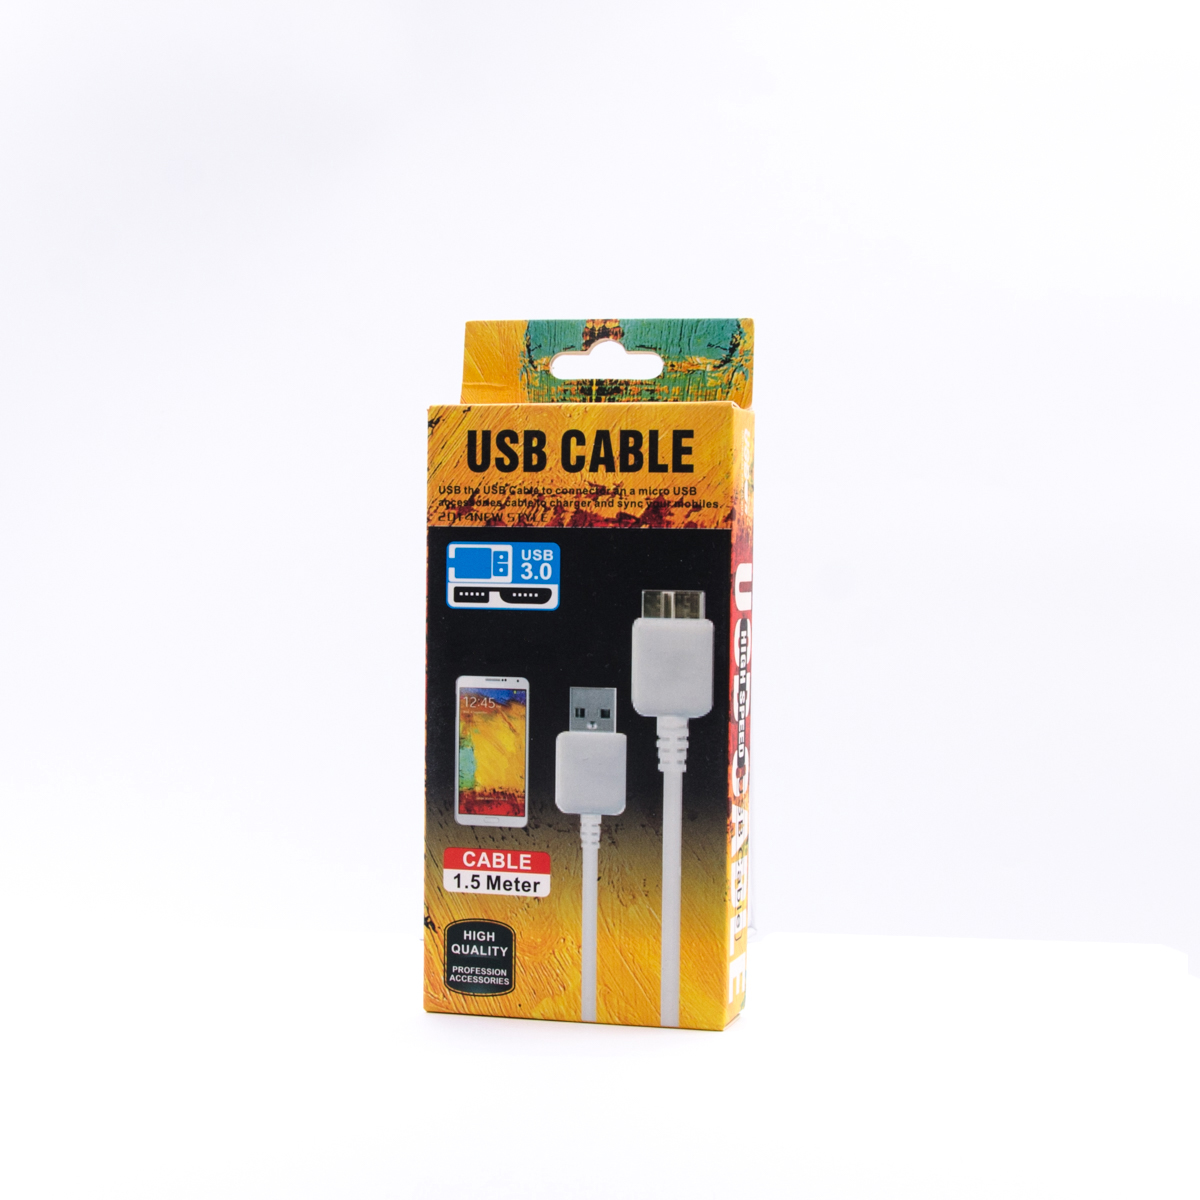 Usb data cable for sm-g900 (galaxy s5) 1a